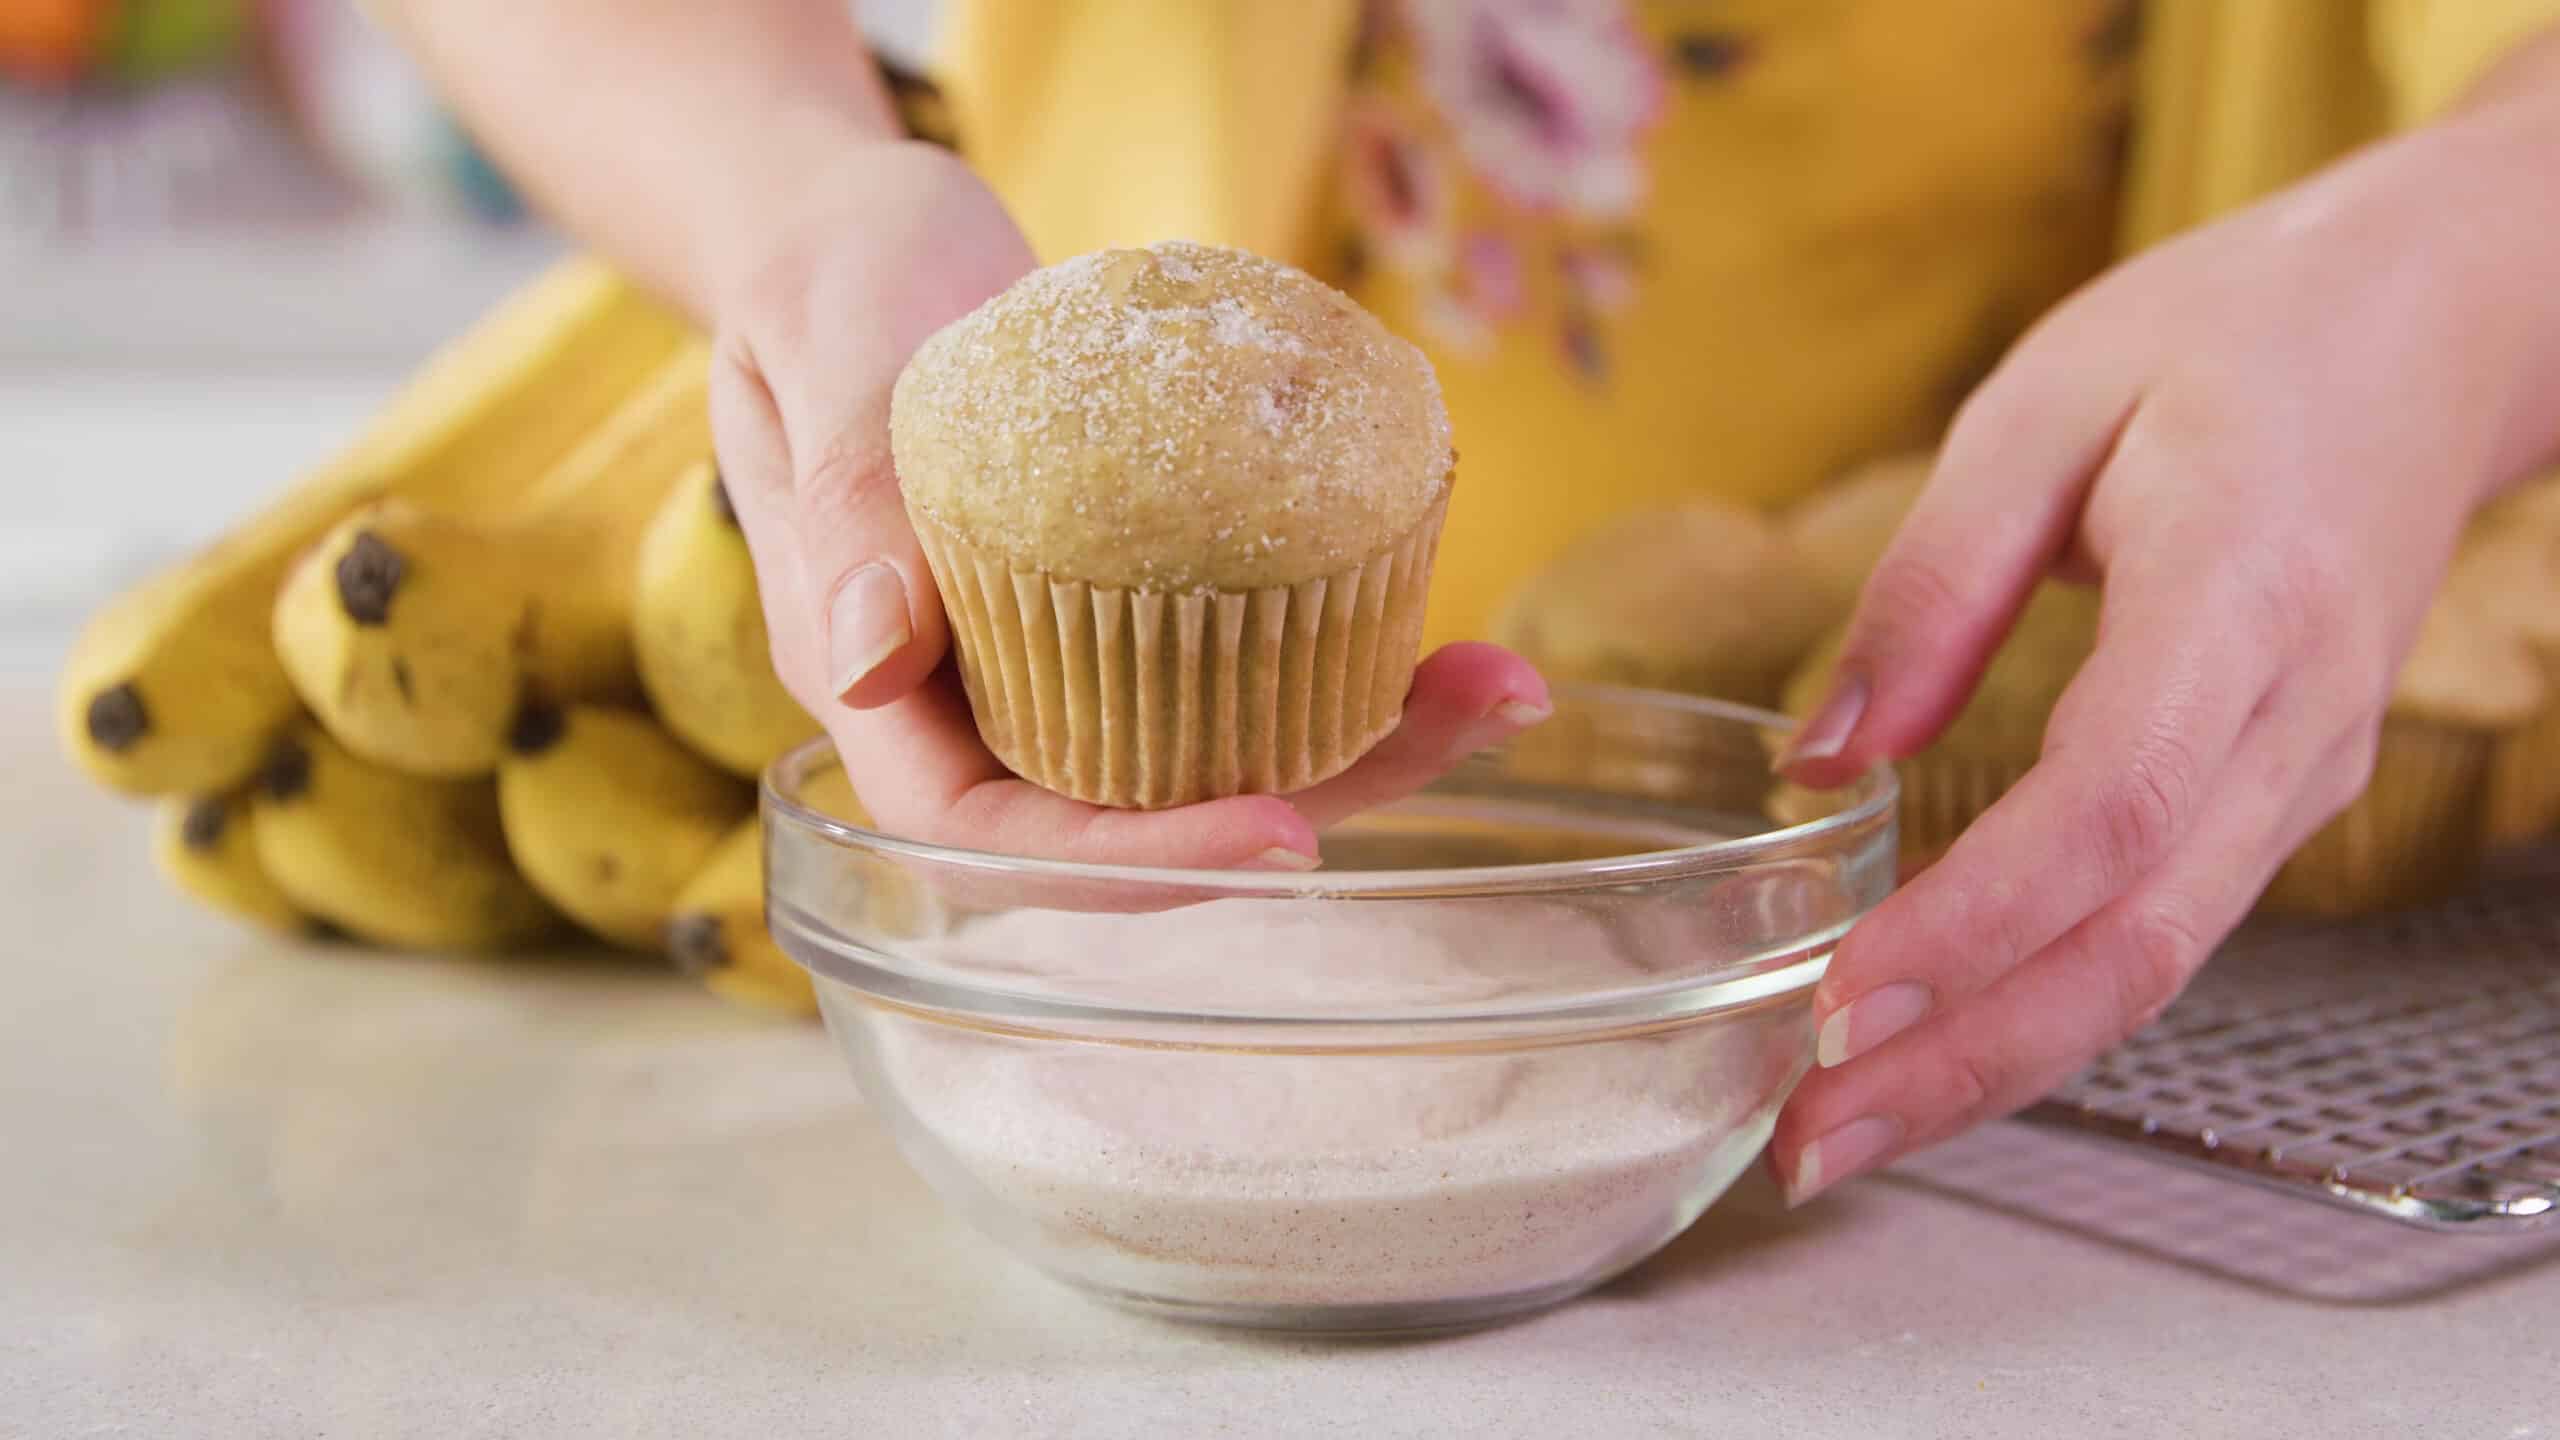 Side view of a clear glass mixing bowl filled with cinnamon and sugar with a single banana muffin held above the bowl after dipping the sugar cinnamon mixture by hand.